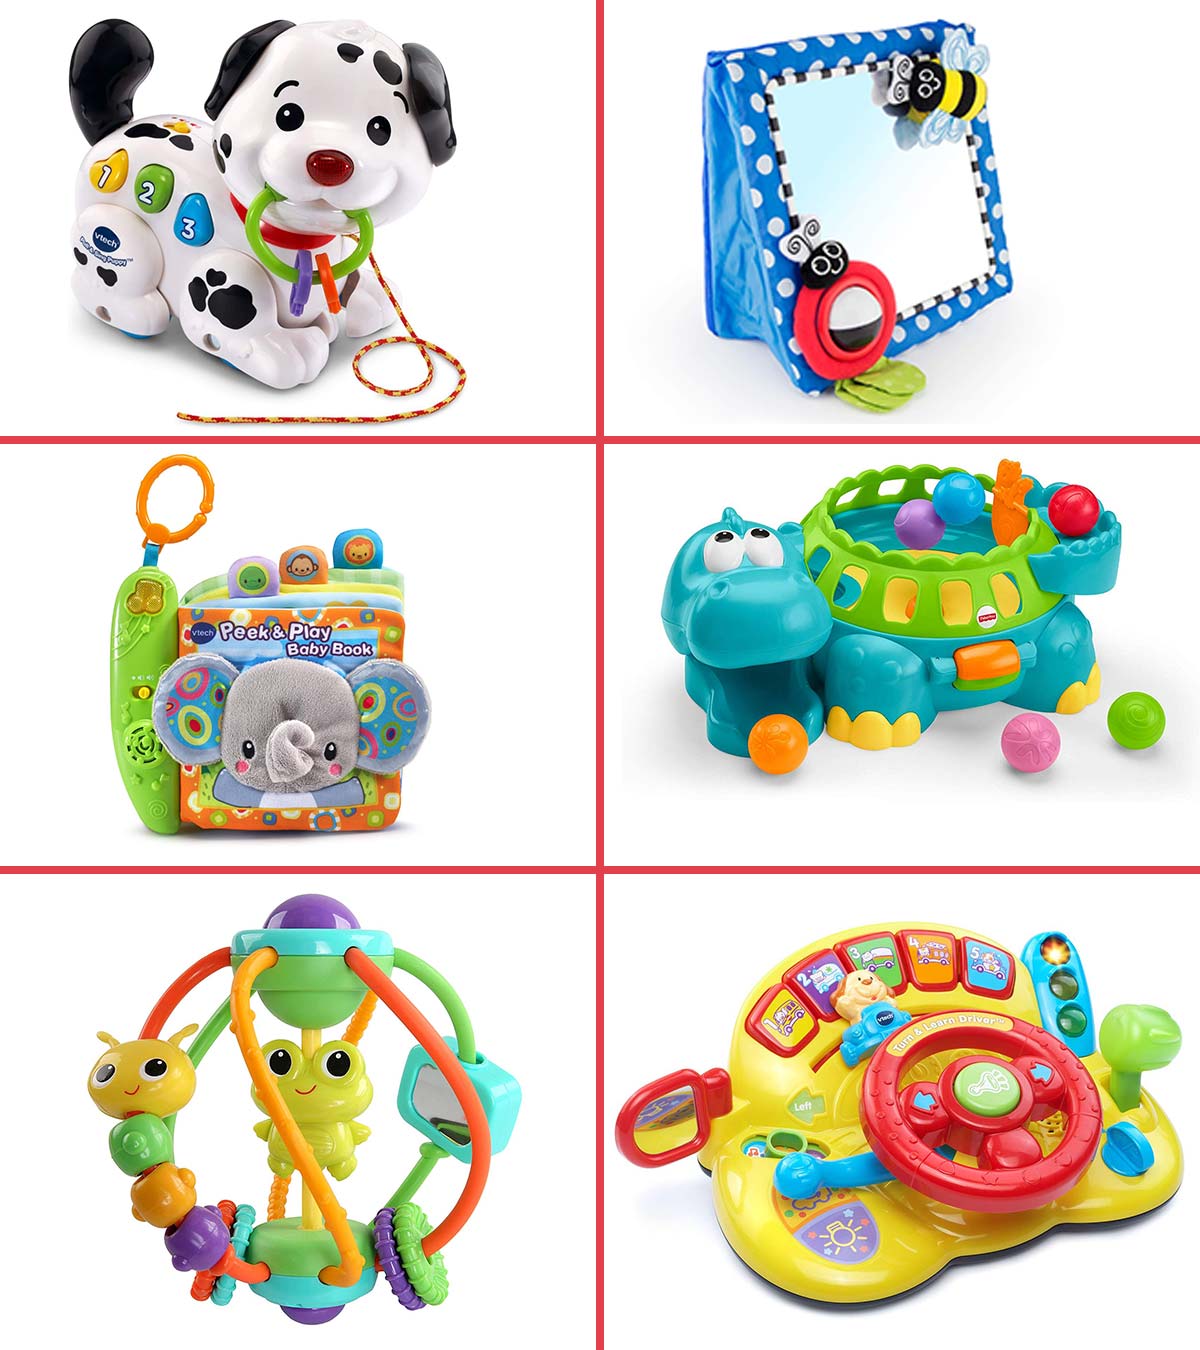 best toys for 12 month old